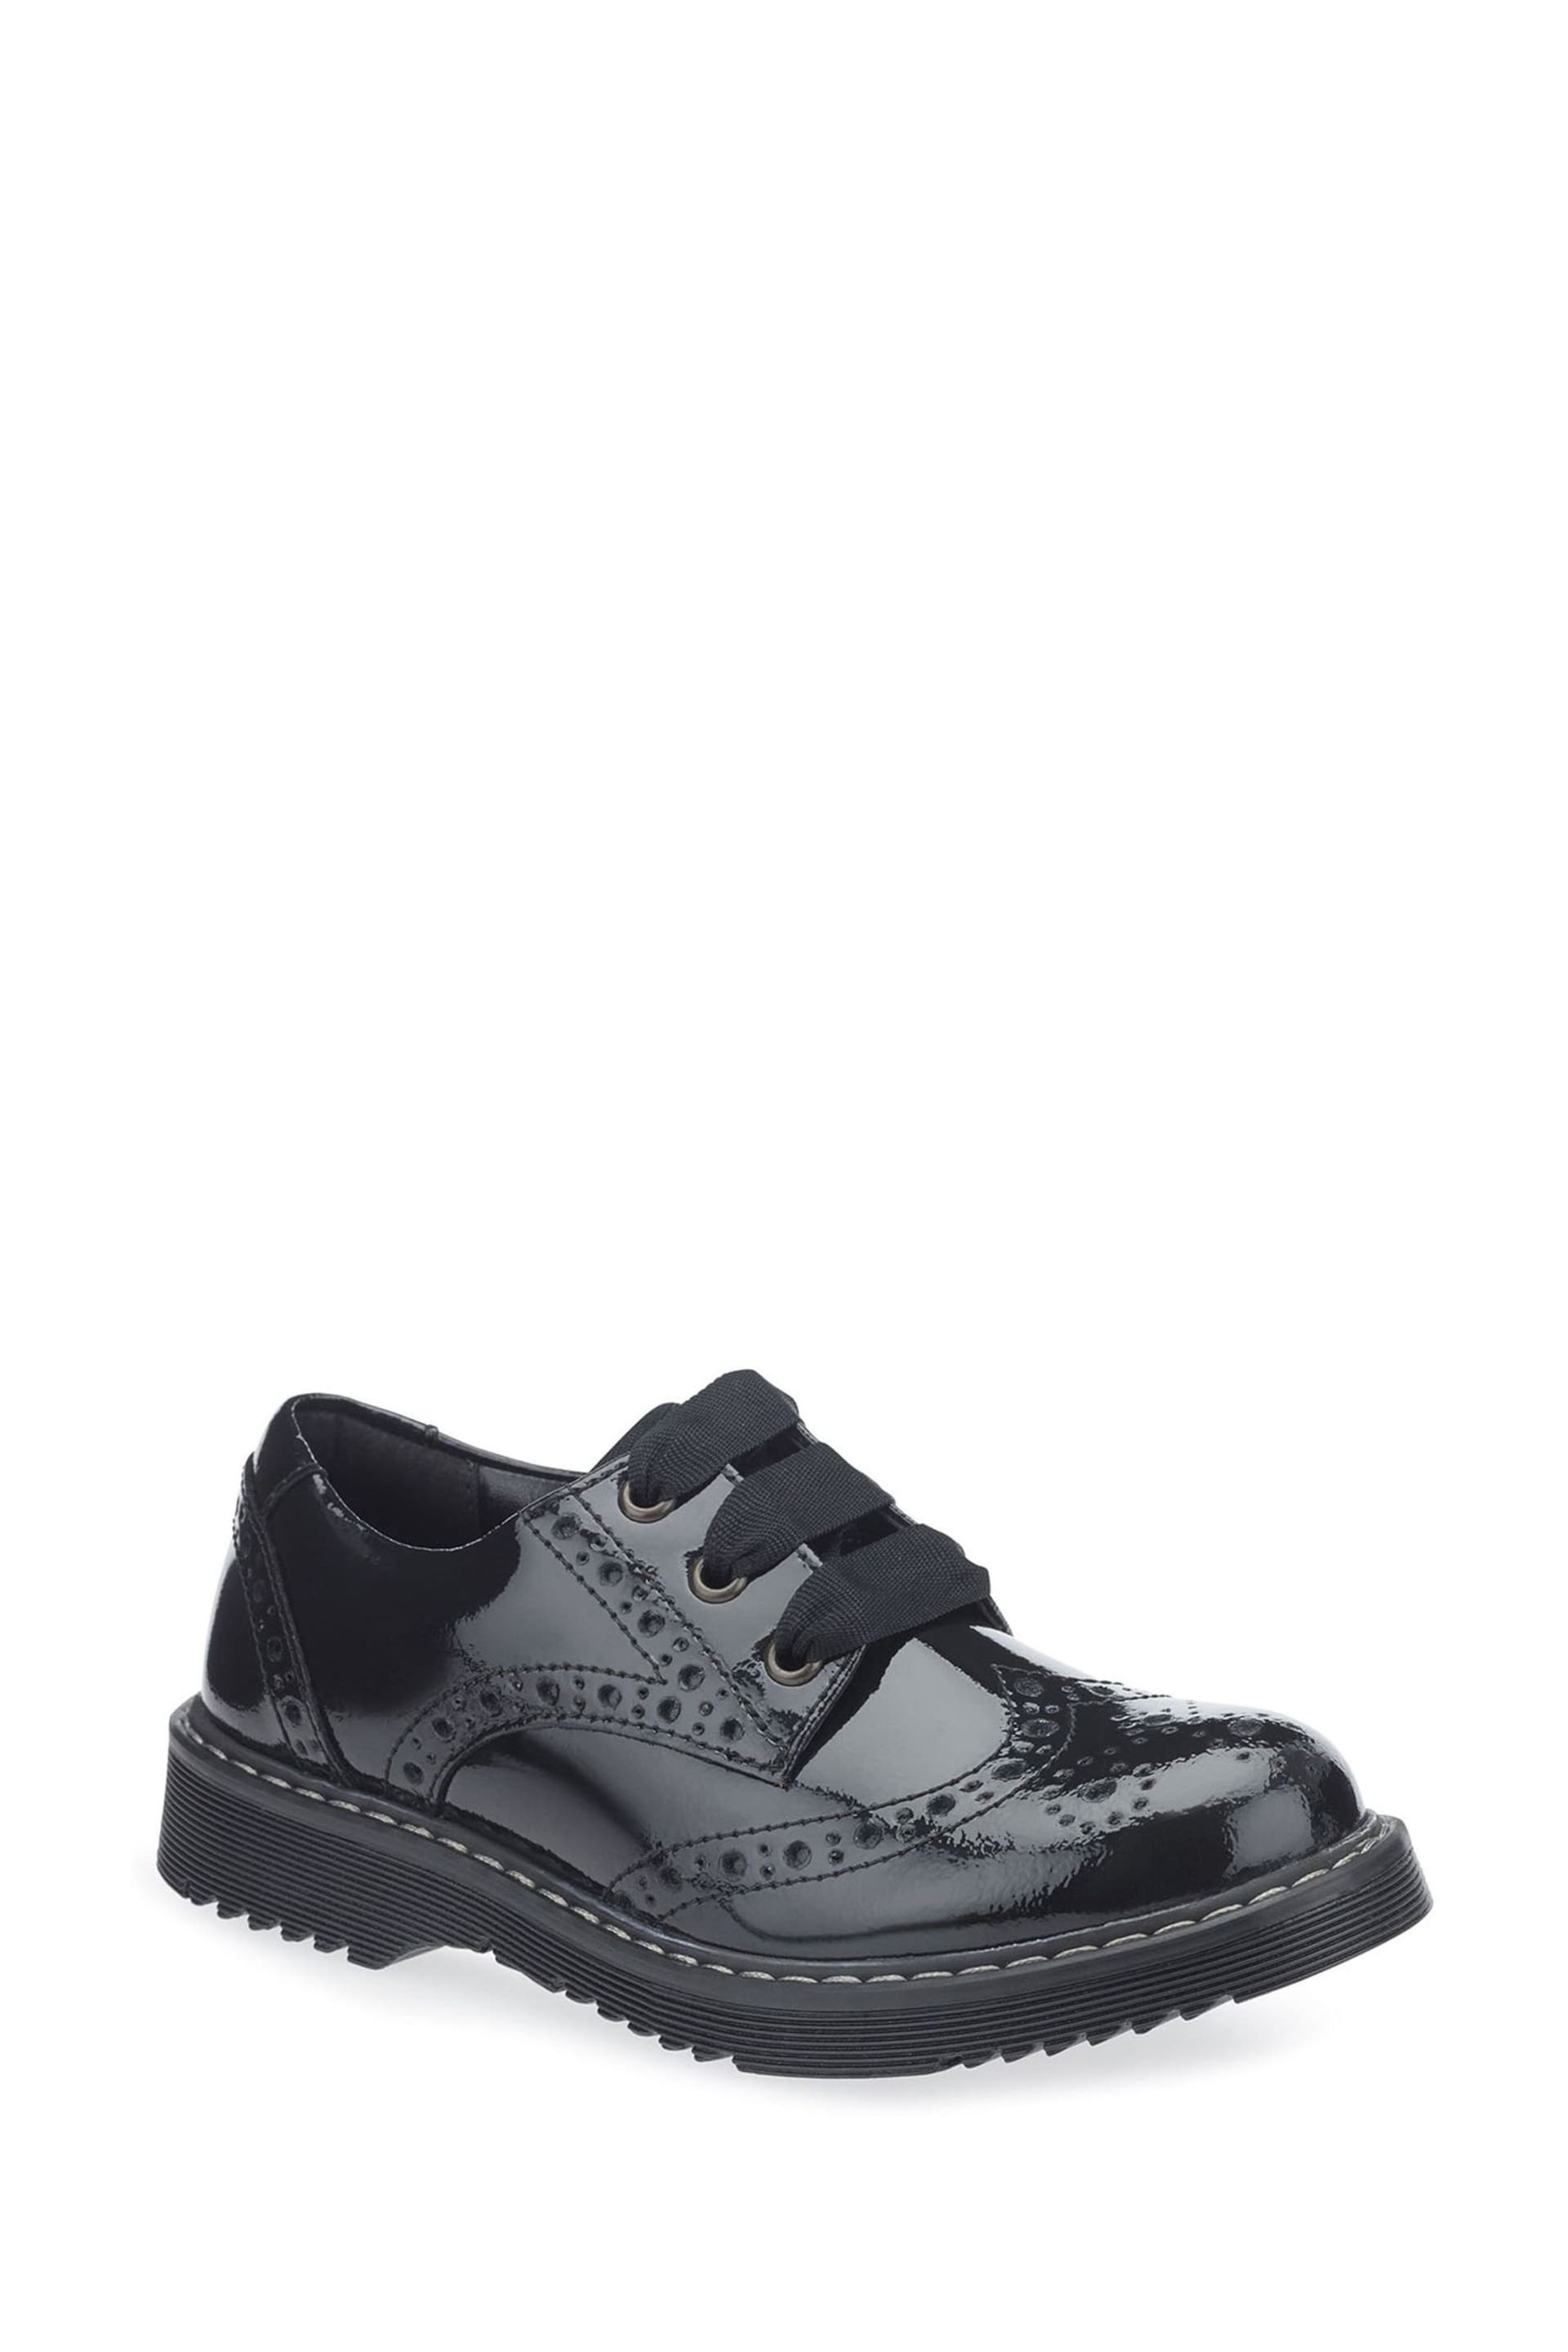 Start-Rite Impulsive Black Patent Leather School Shoes Wide Fit - Image 4 of 9